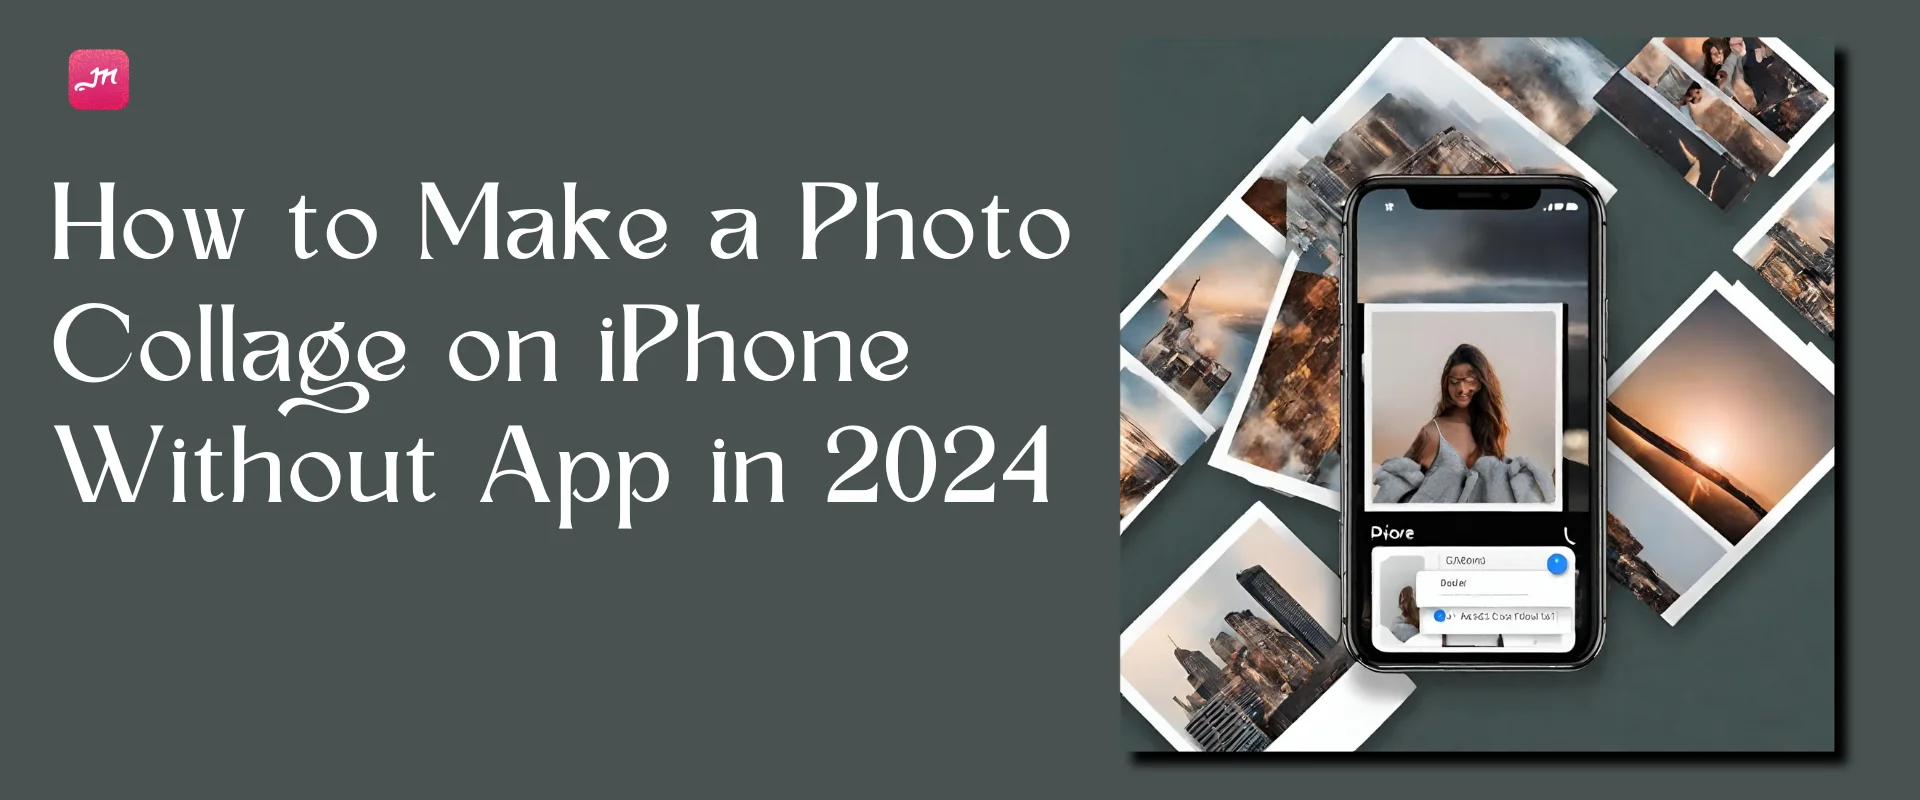 how to make a photo collage on iphone